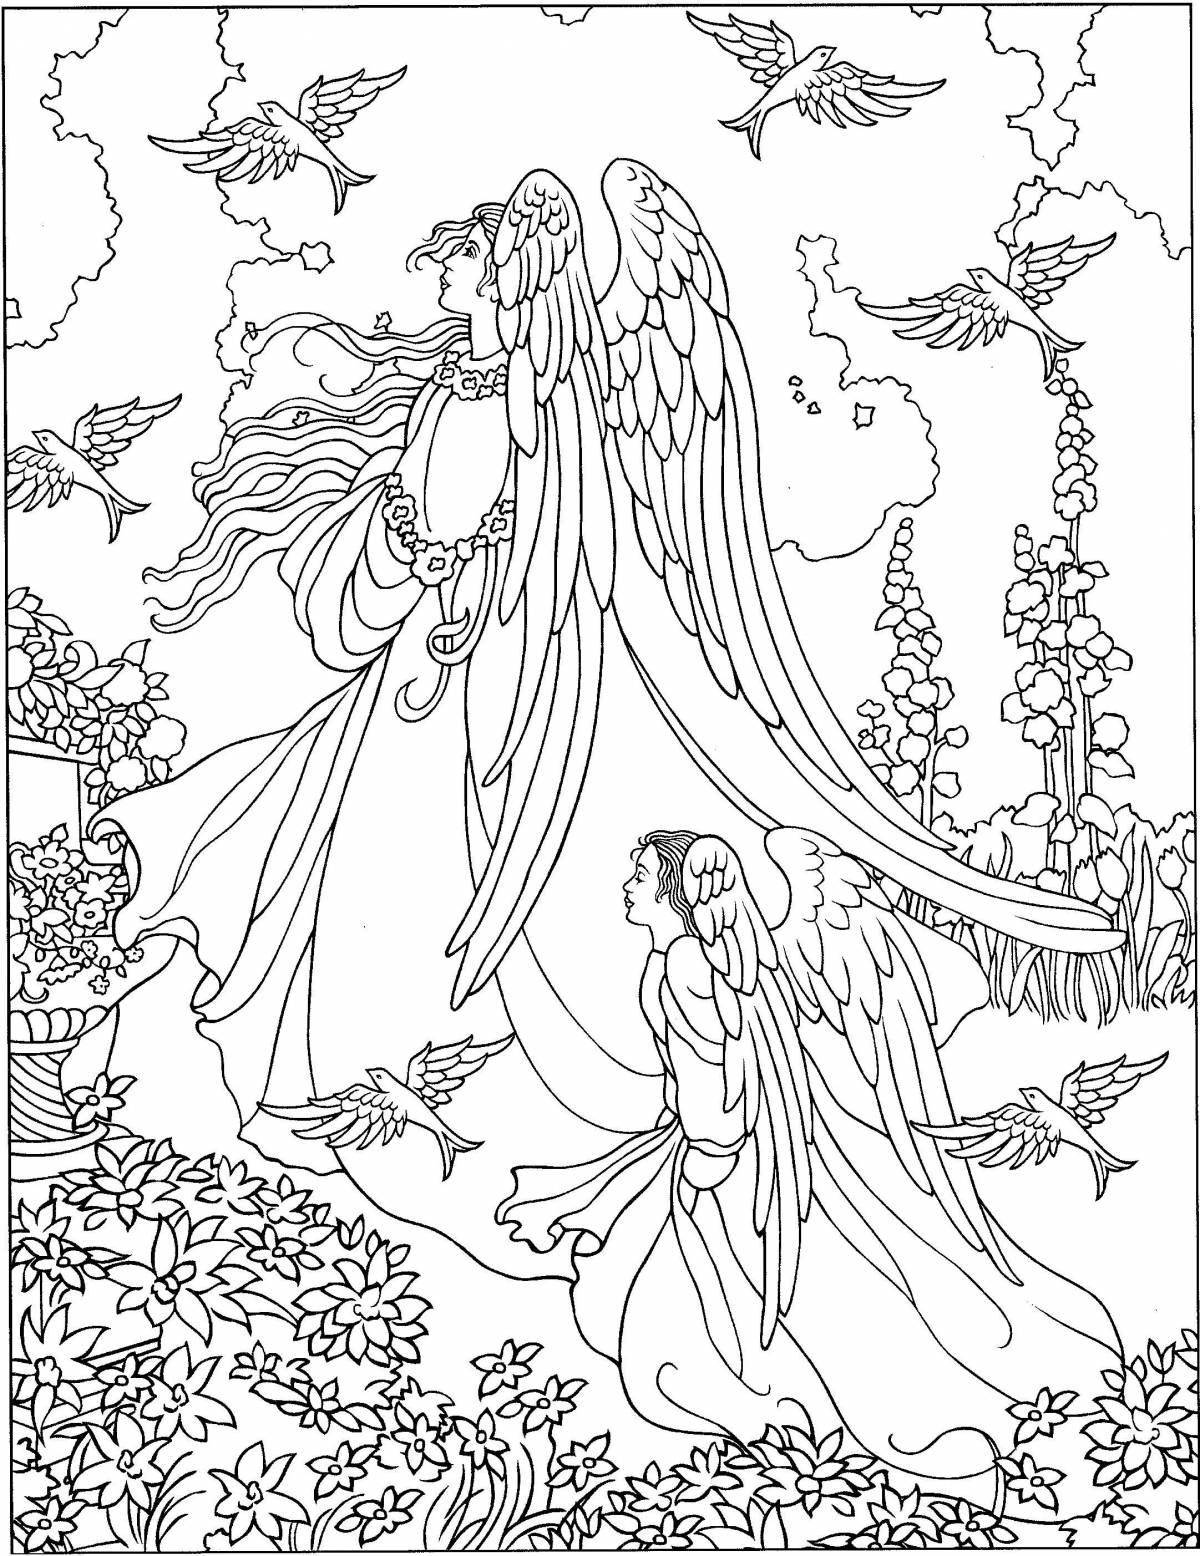 Gorgeous angel antistress coloring book